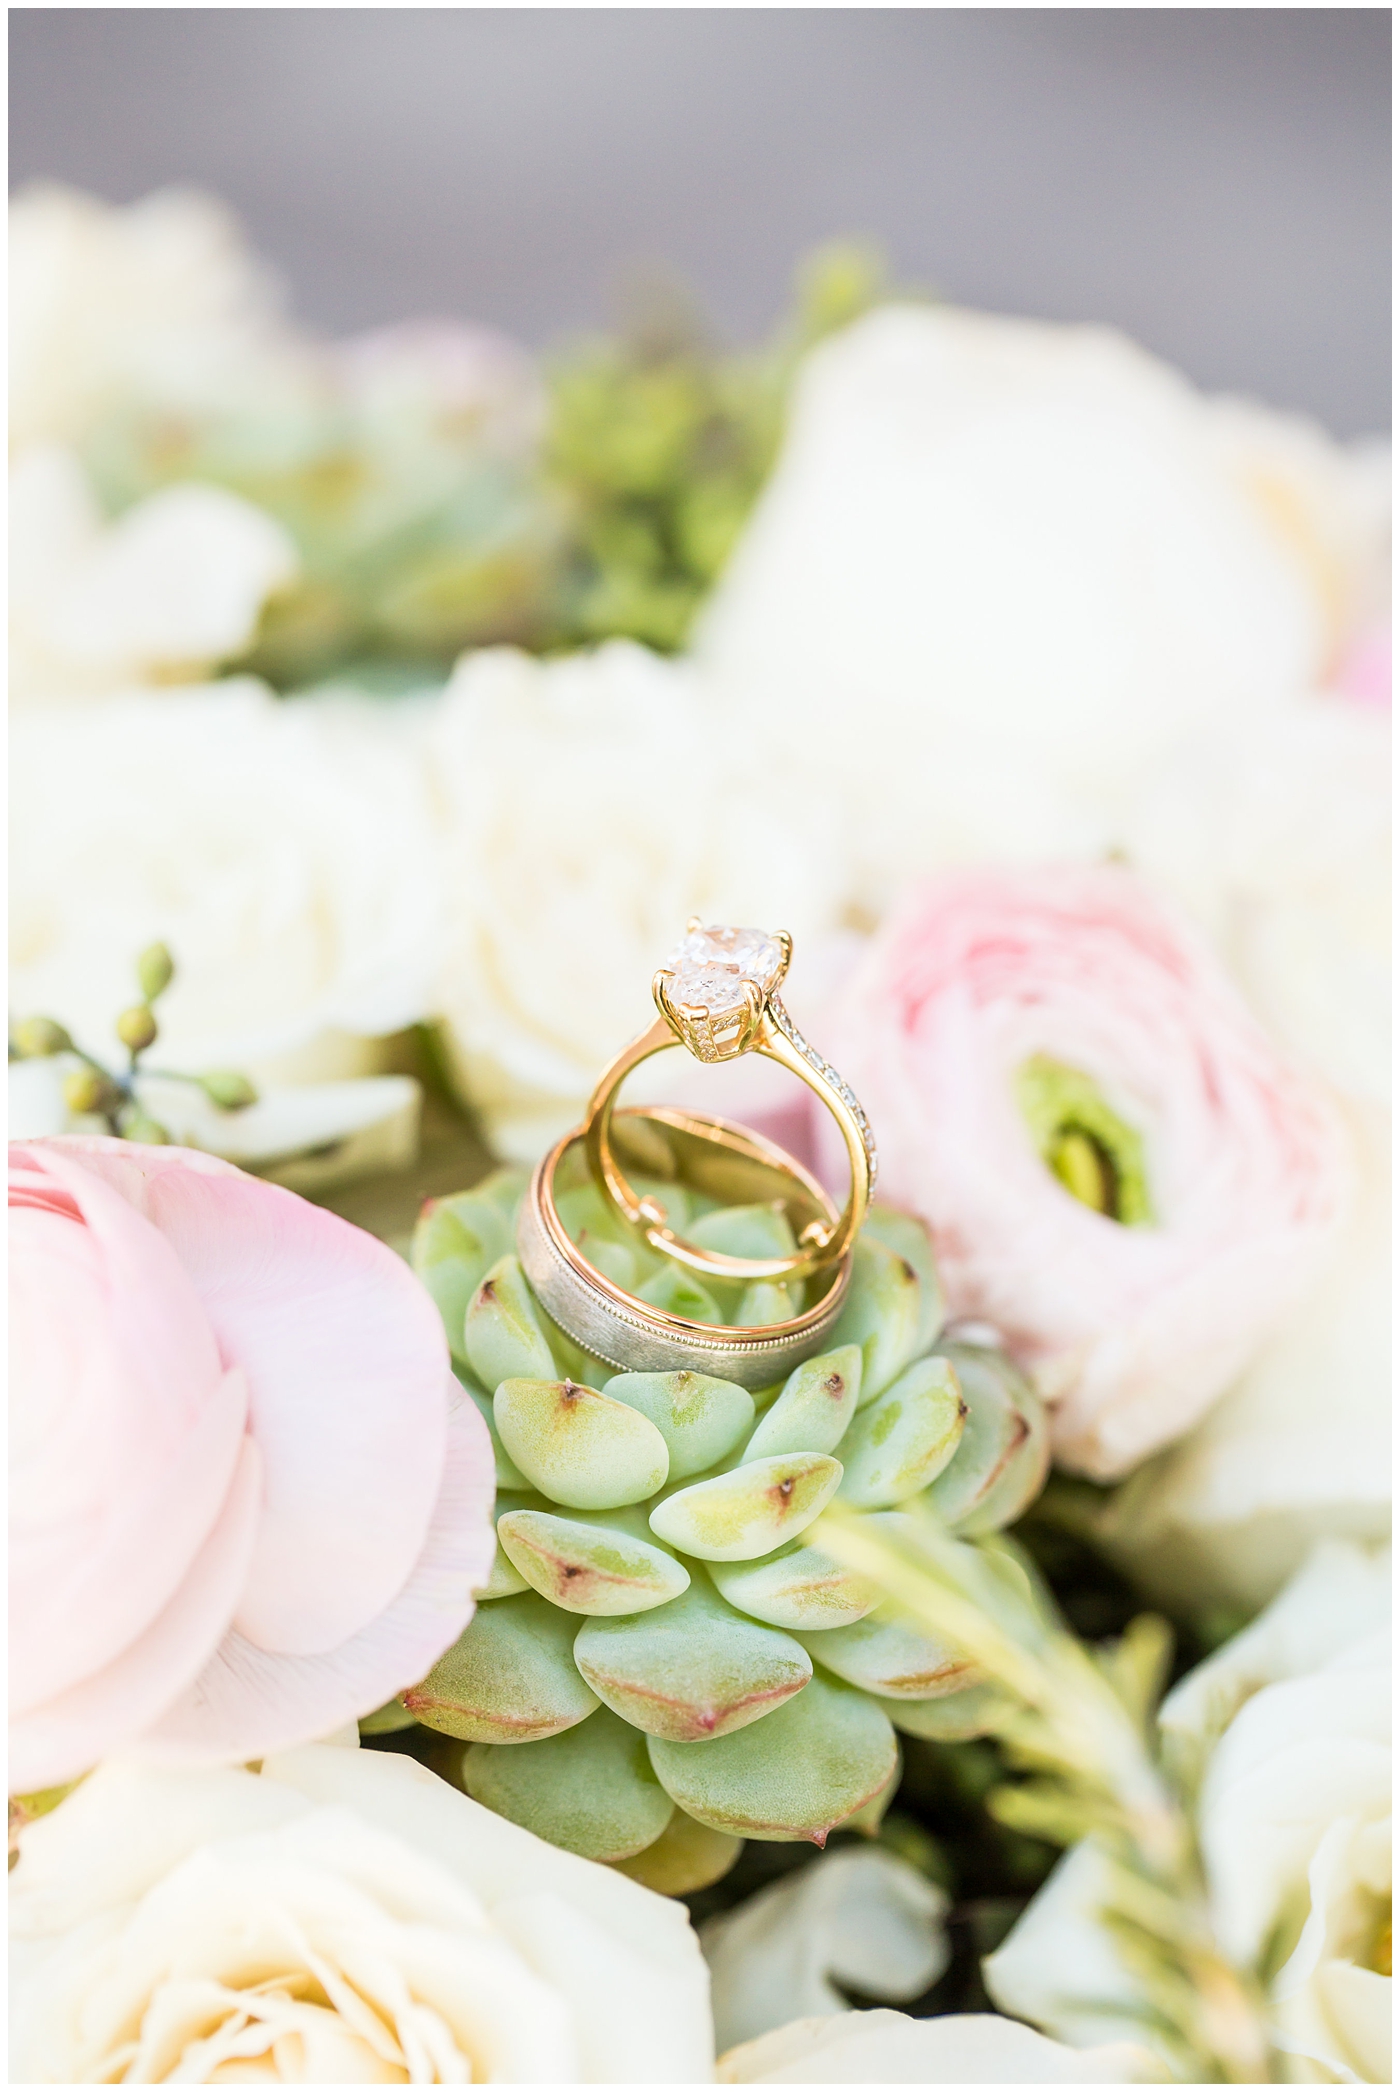 Wedding rings on bride's white rose, pink ranunculus, and green succulents